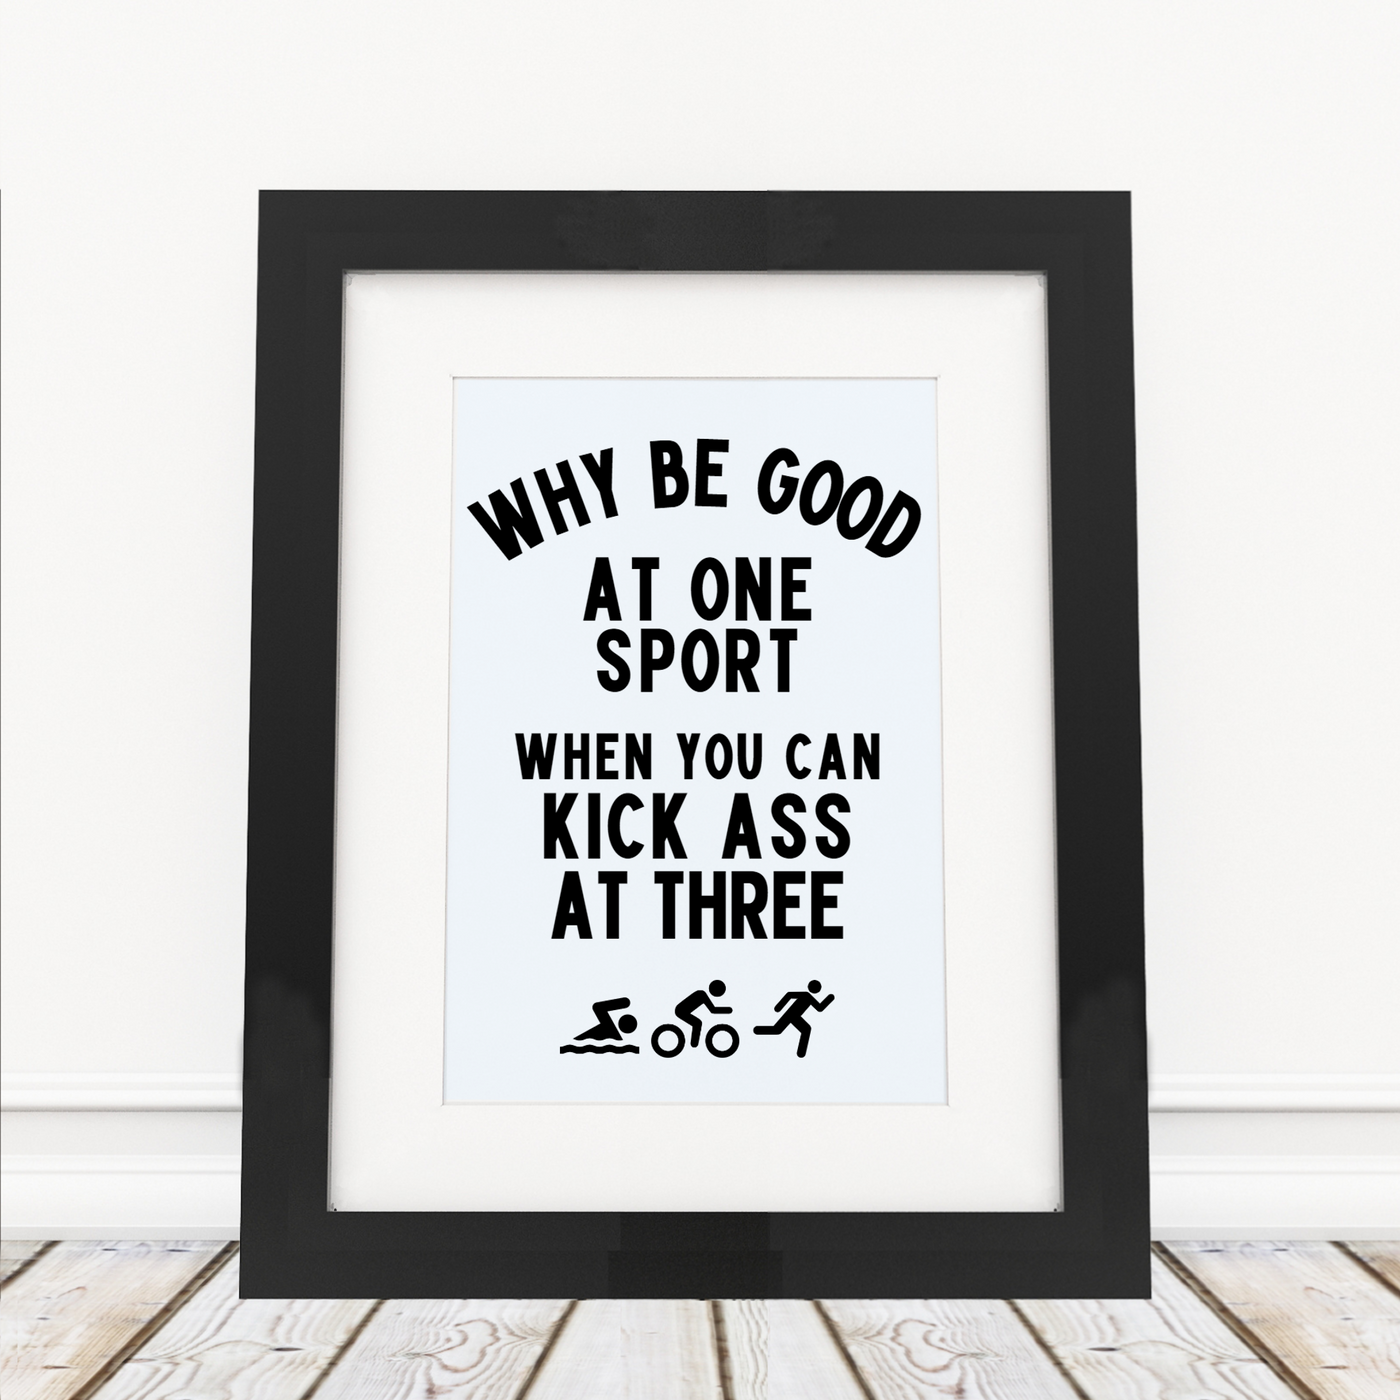 Why be good at one sport - Framed Print